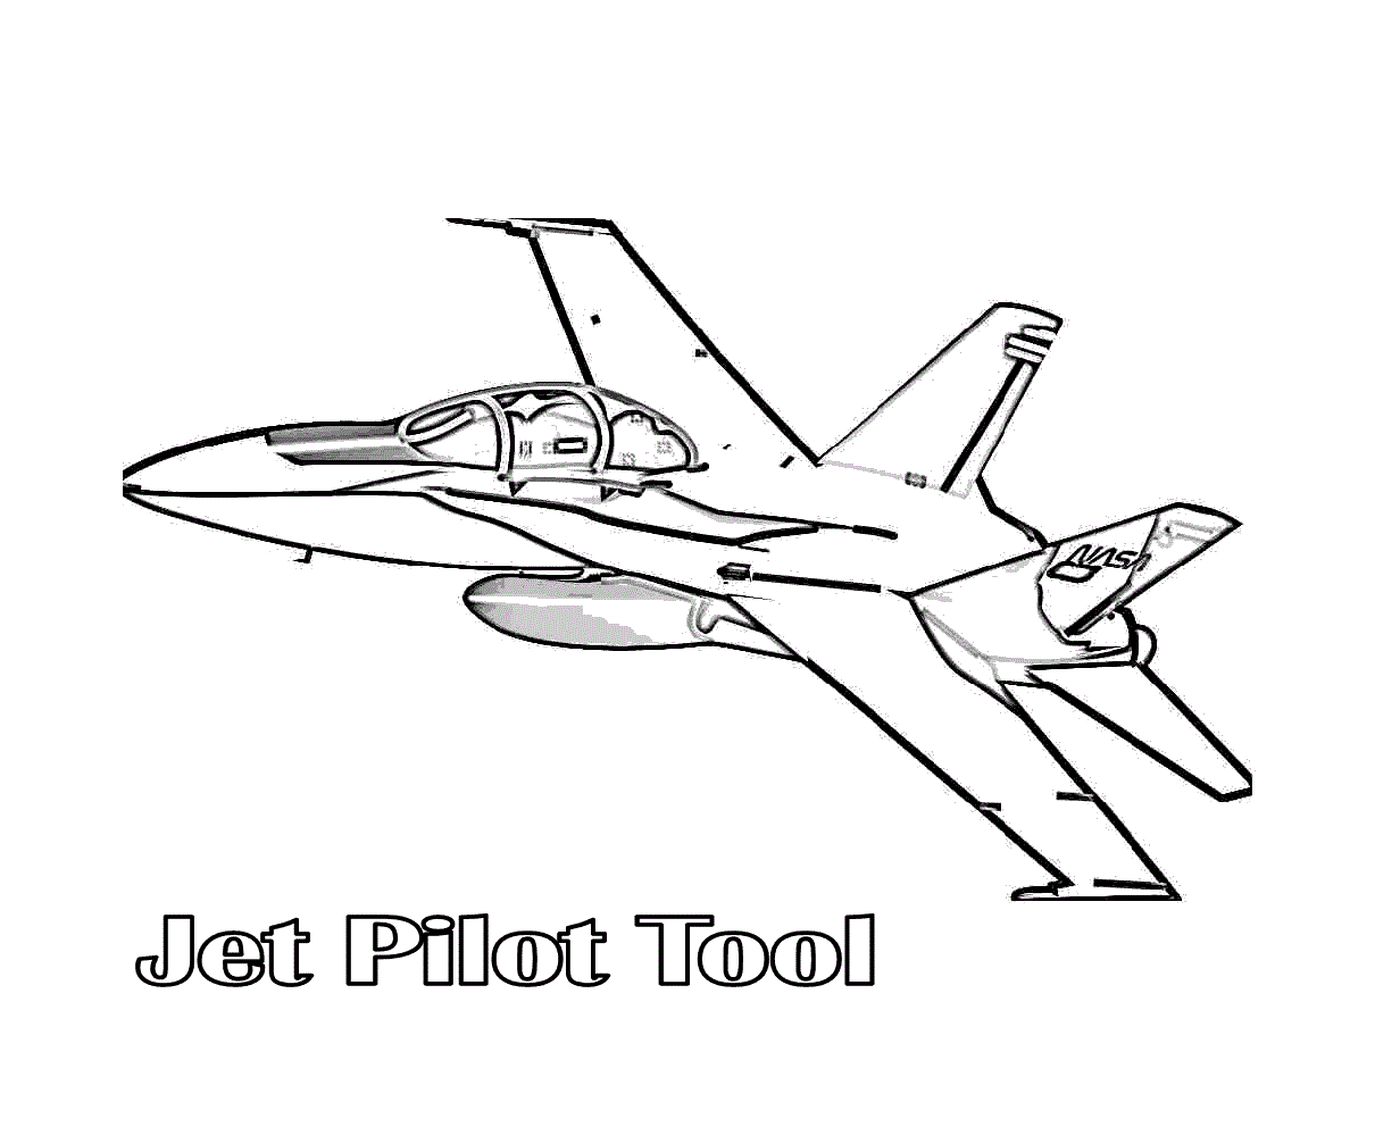  A fighter aircraft with the text jet pilot tool 